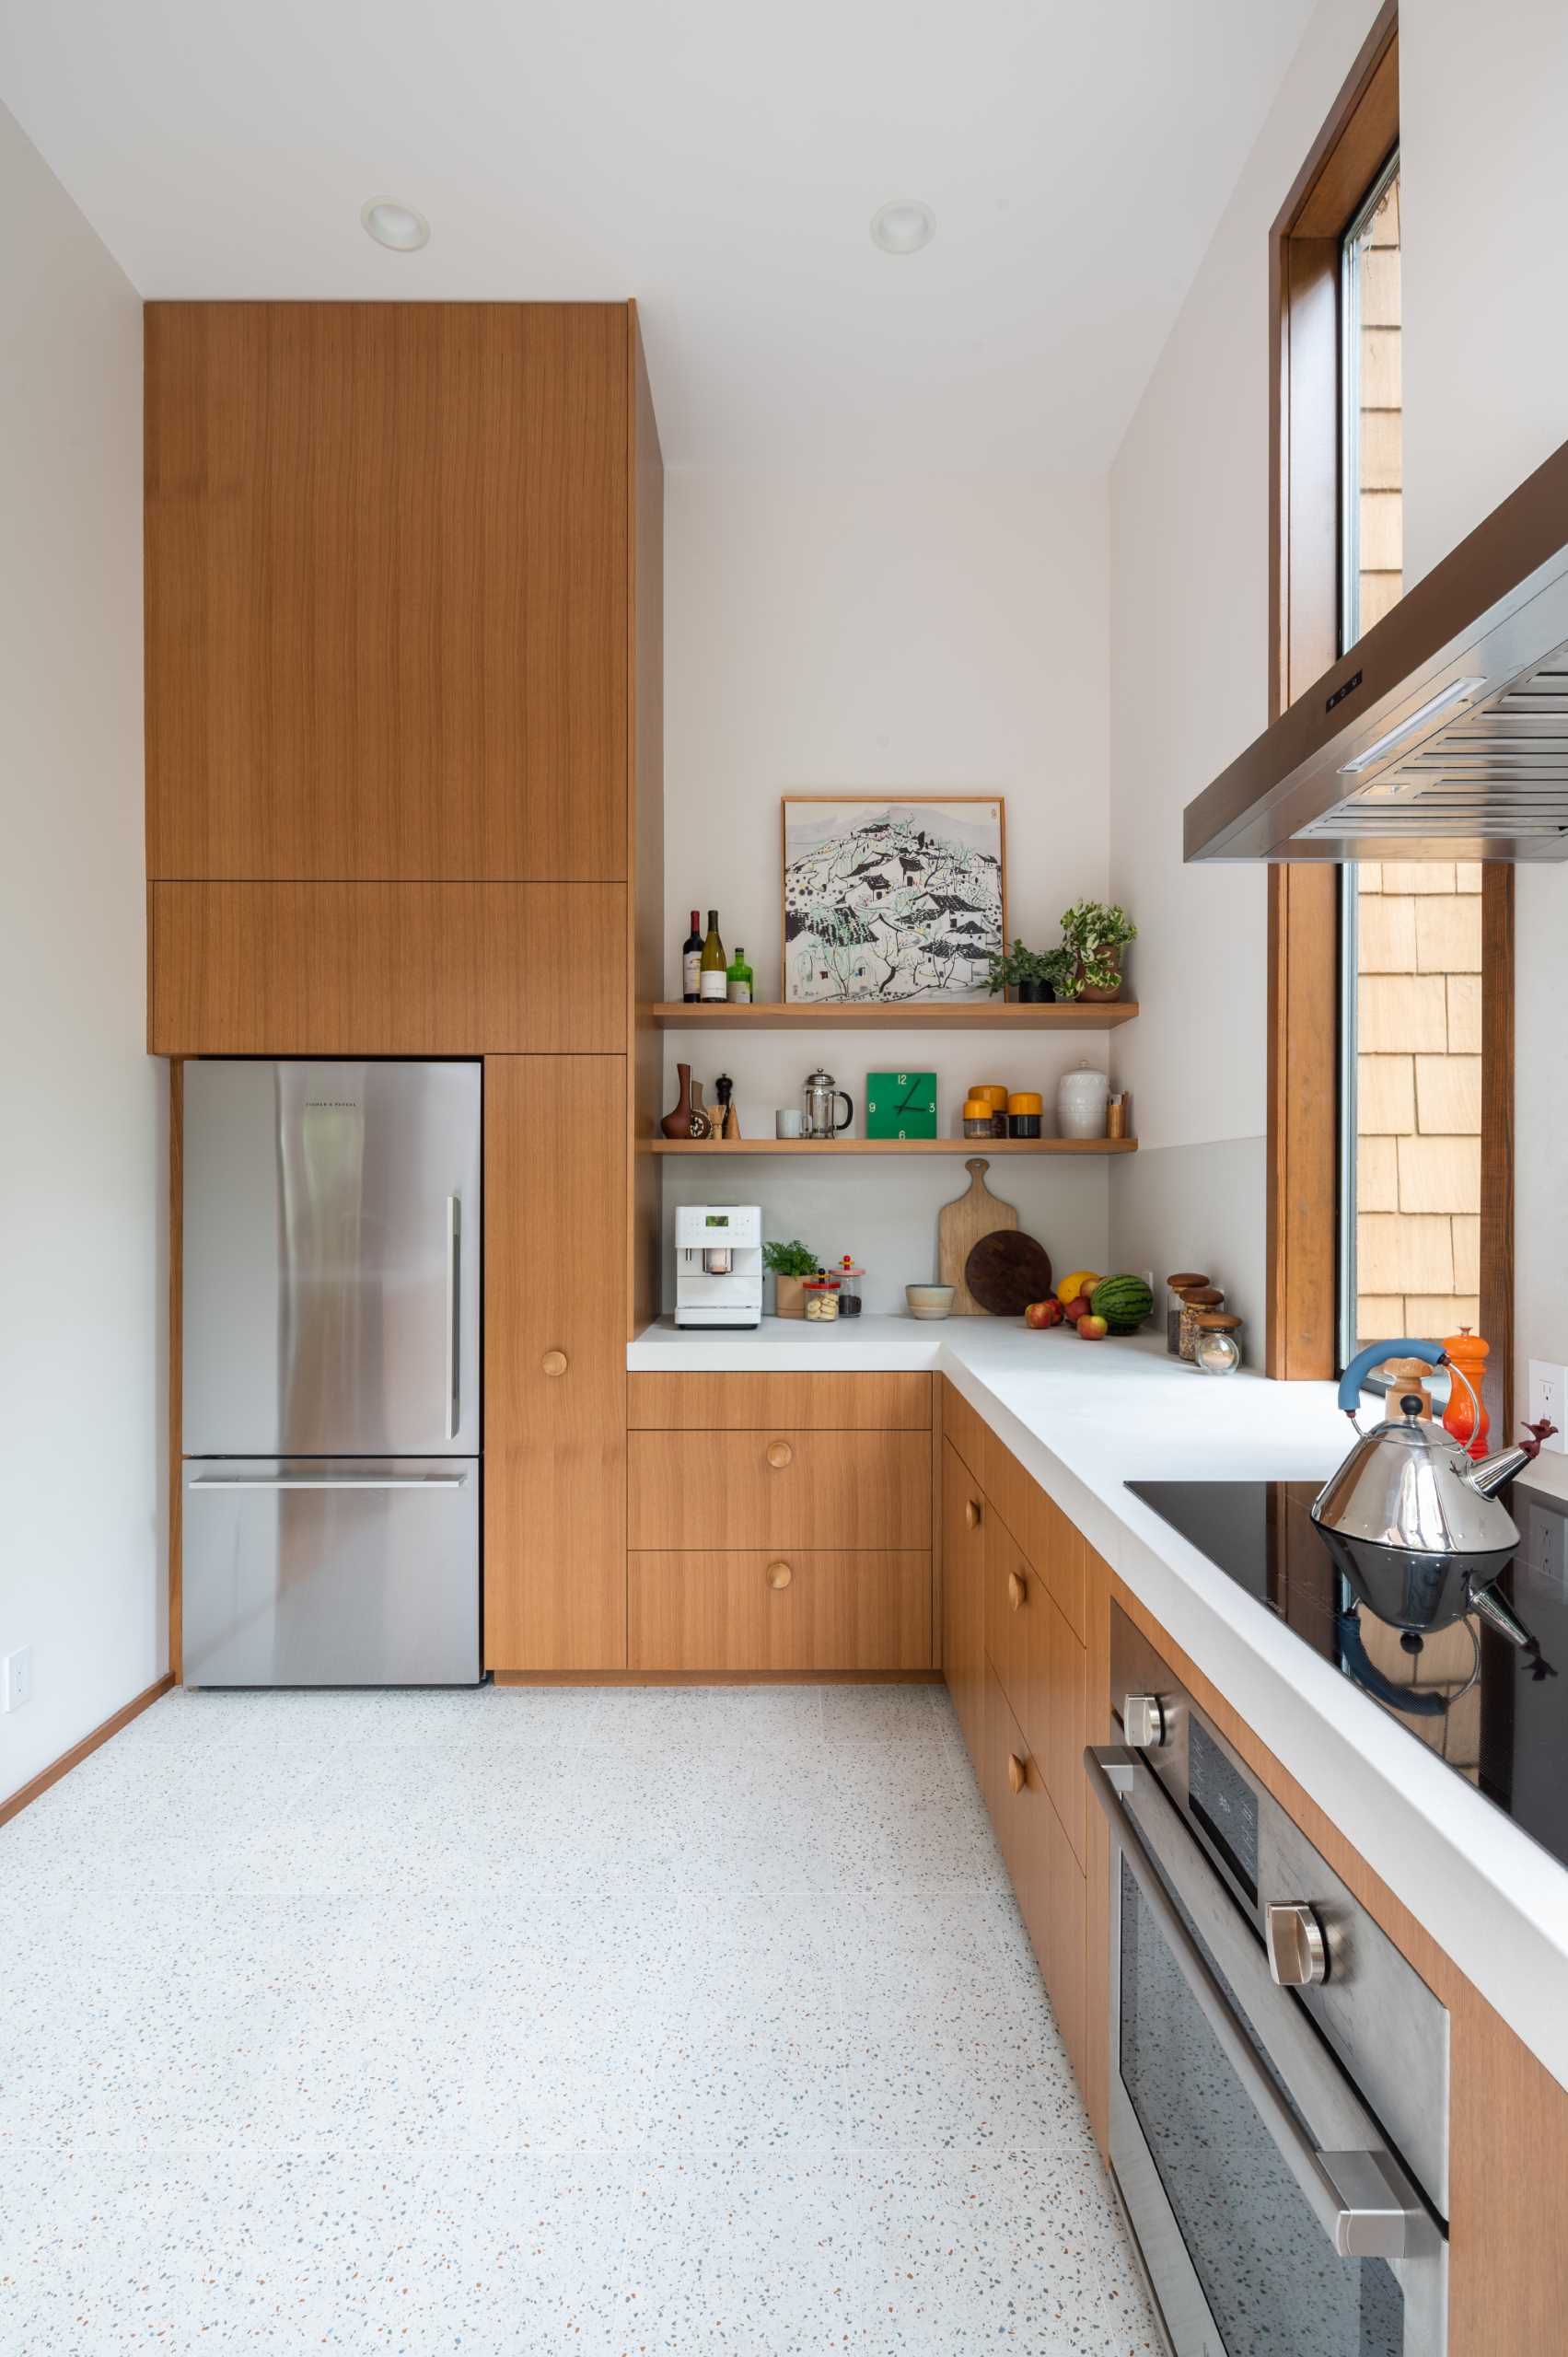 A remodeled kitchen with wood cabinets and shelves,  thick countertops, and tall windows.